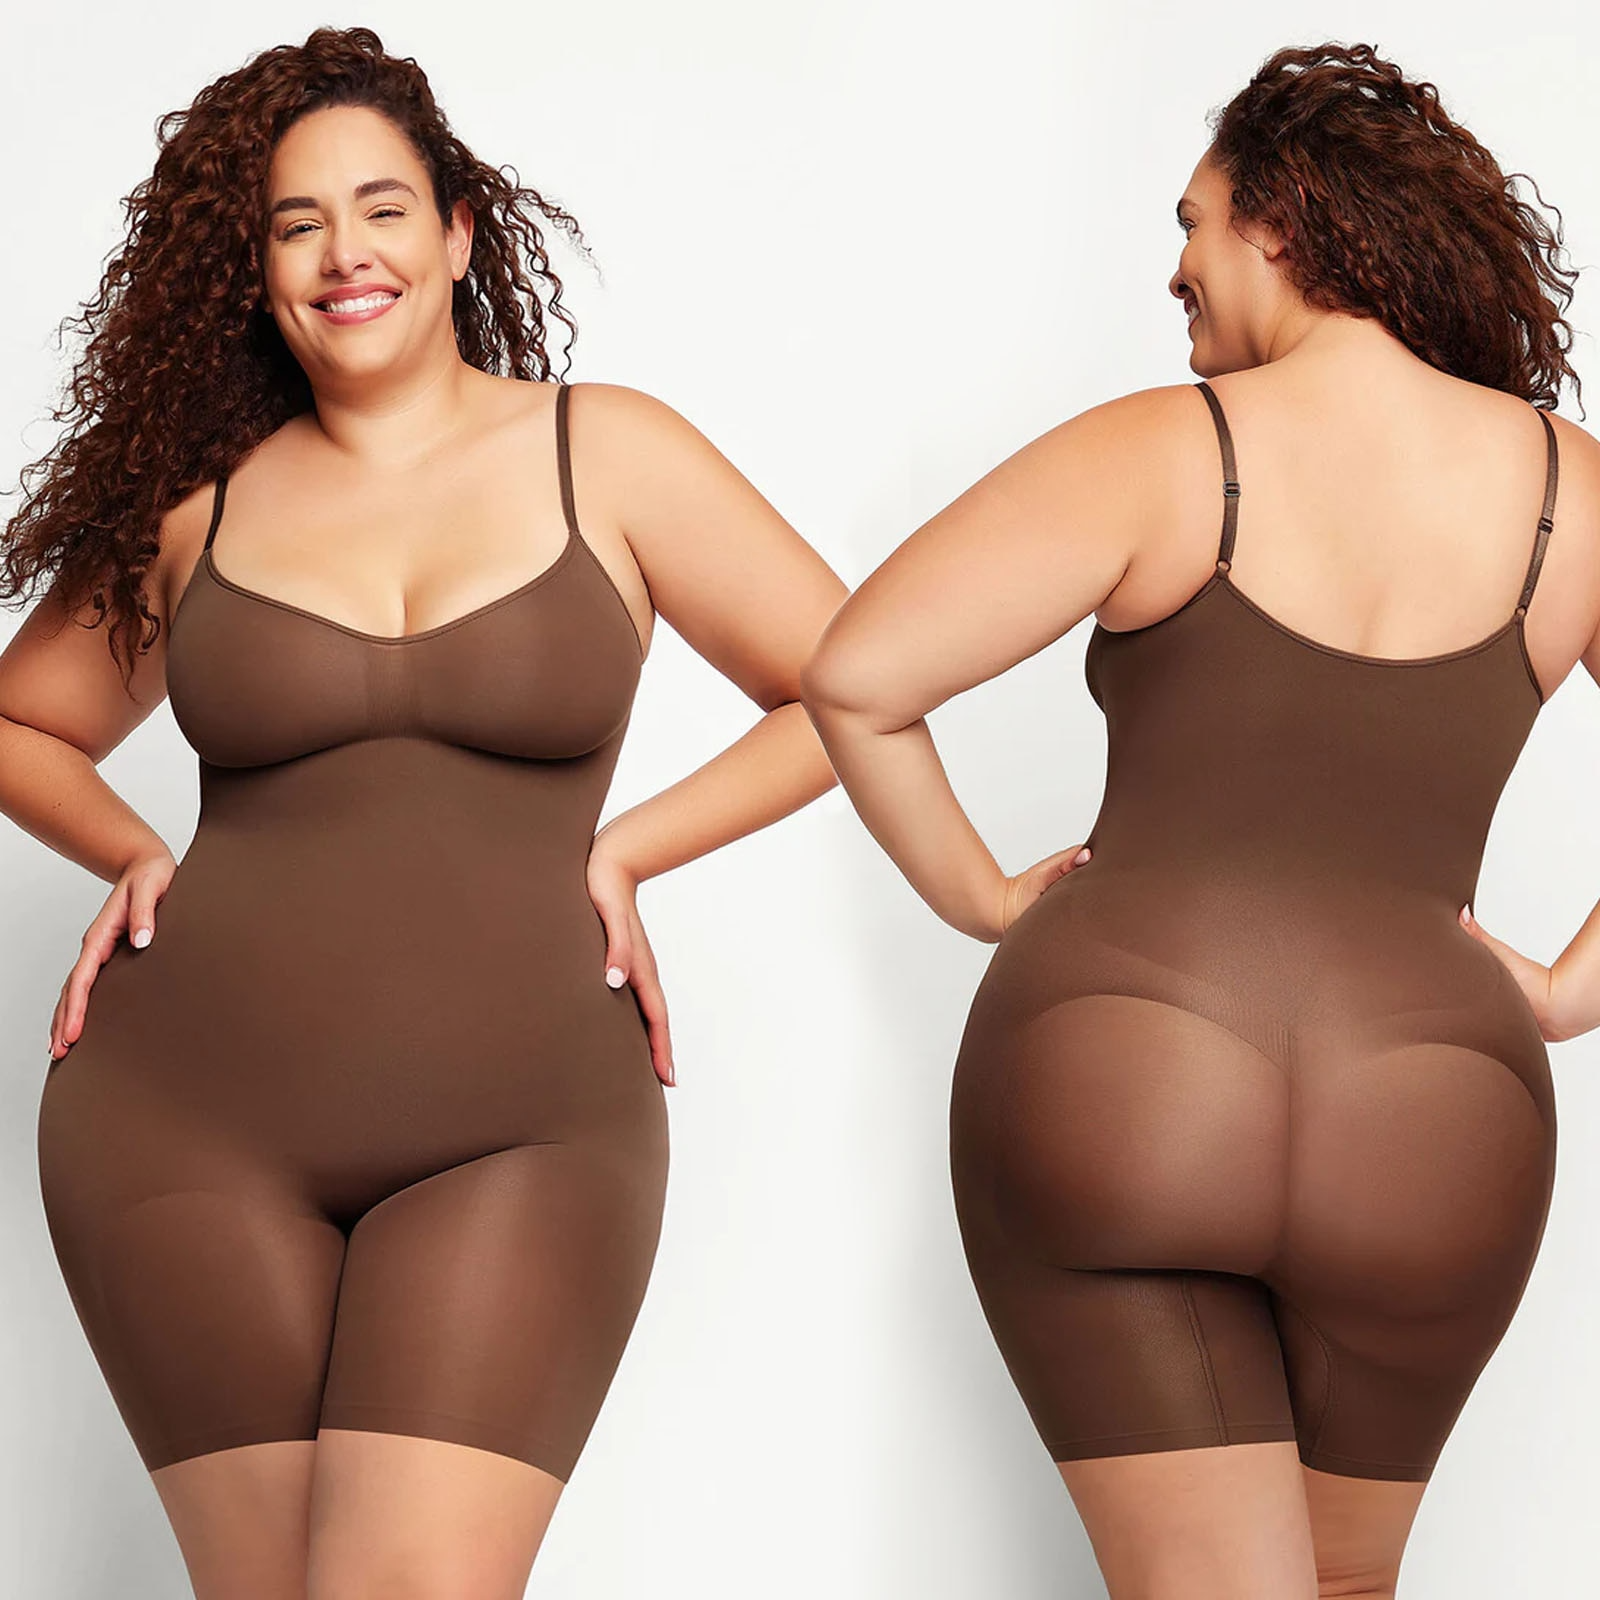 Looking
For Some Body Shaper